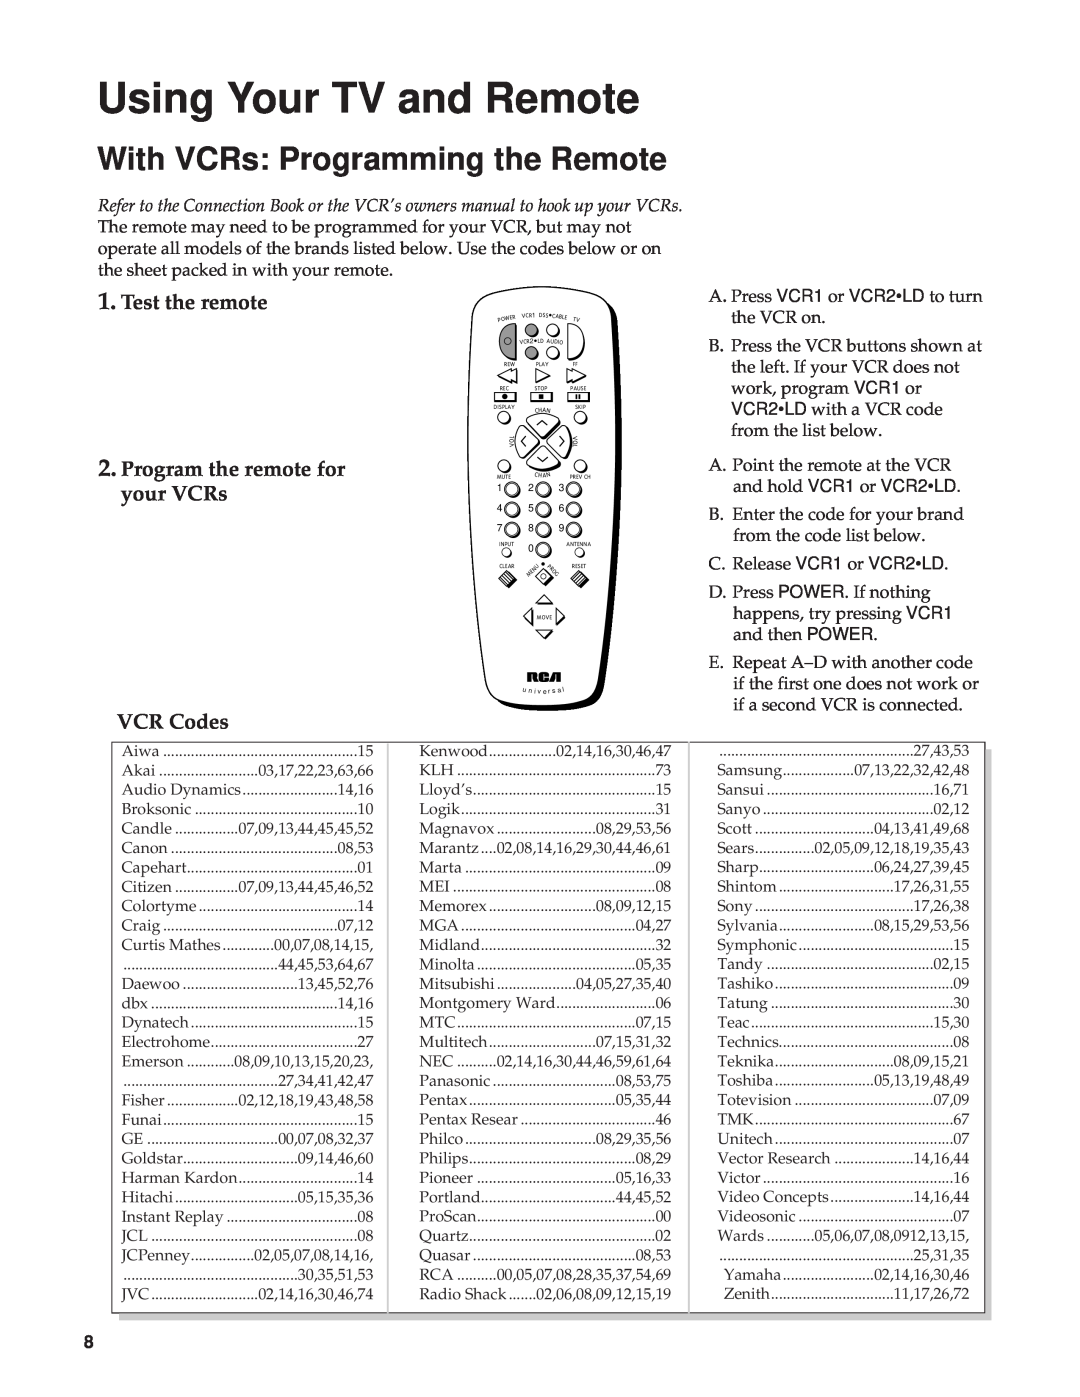 RCA Color TV manual With VCRs Programming the Remote, Test the remote, Program the remote for your VCRs, VCR Codes 